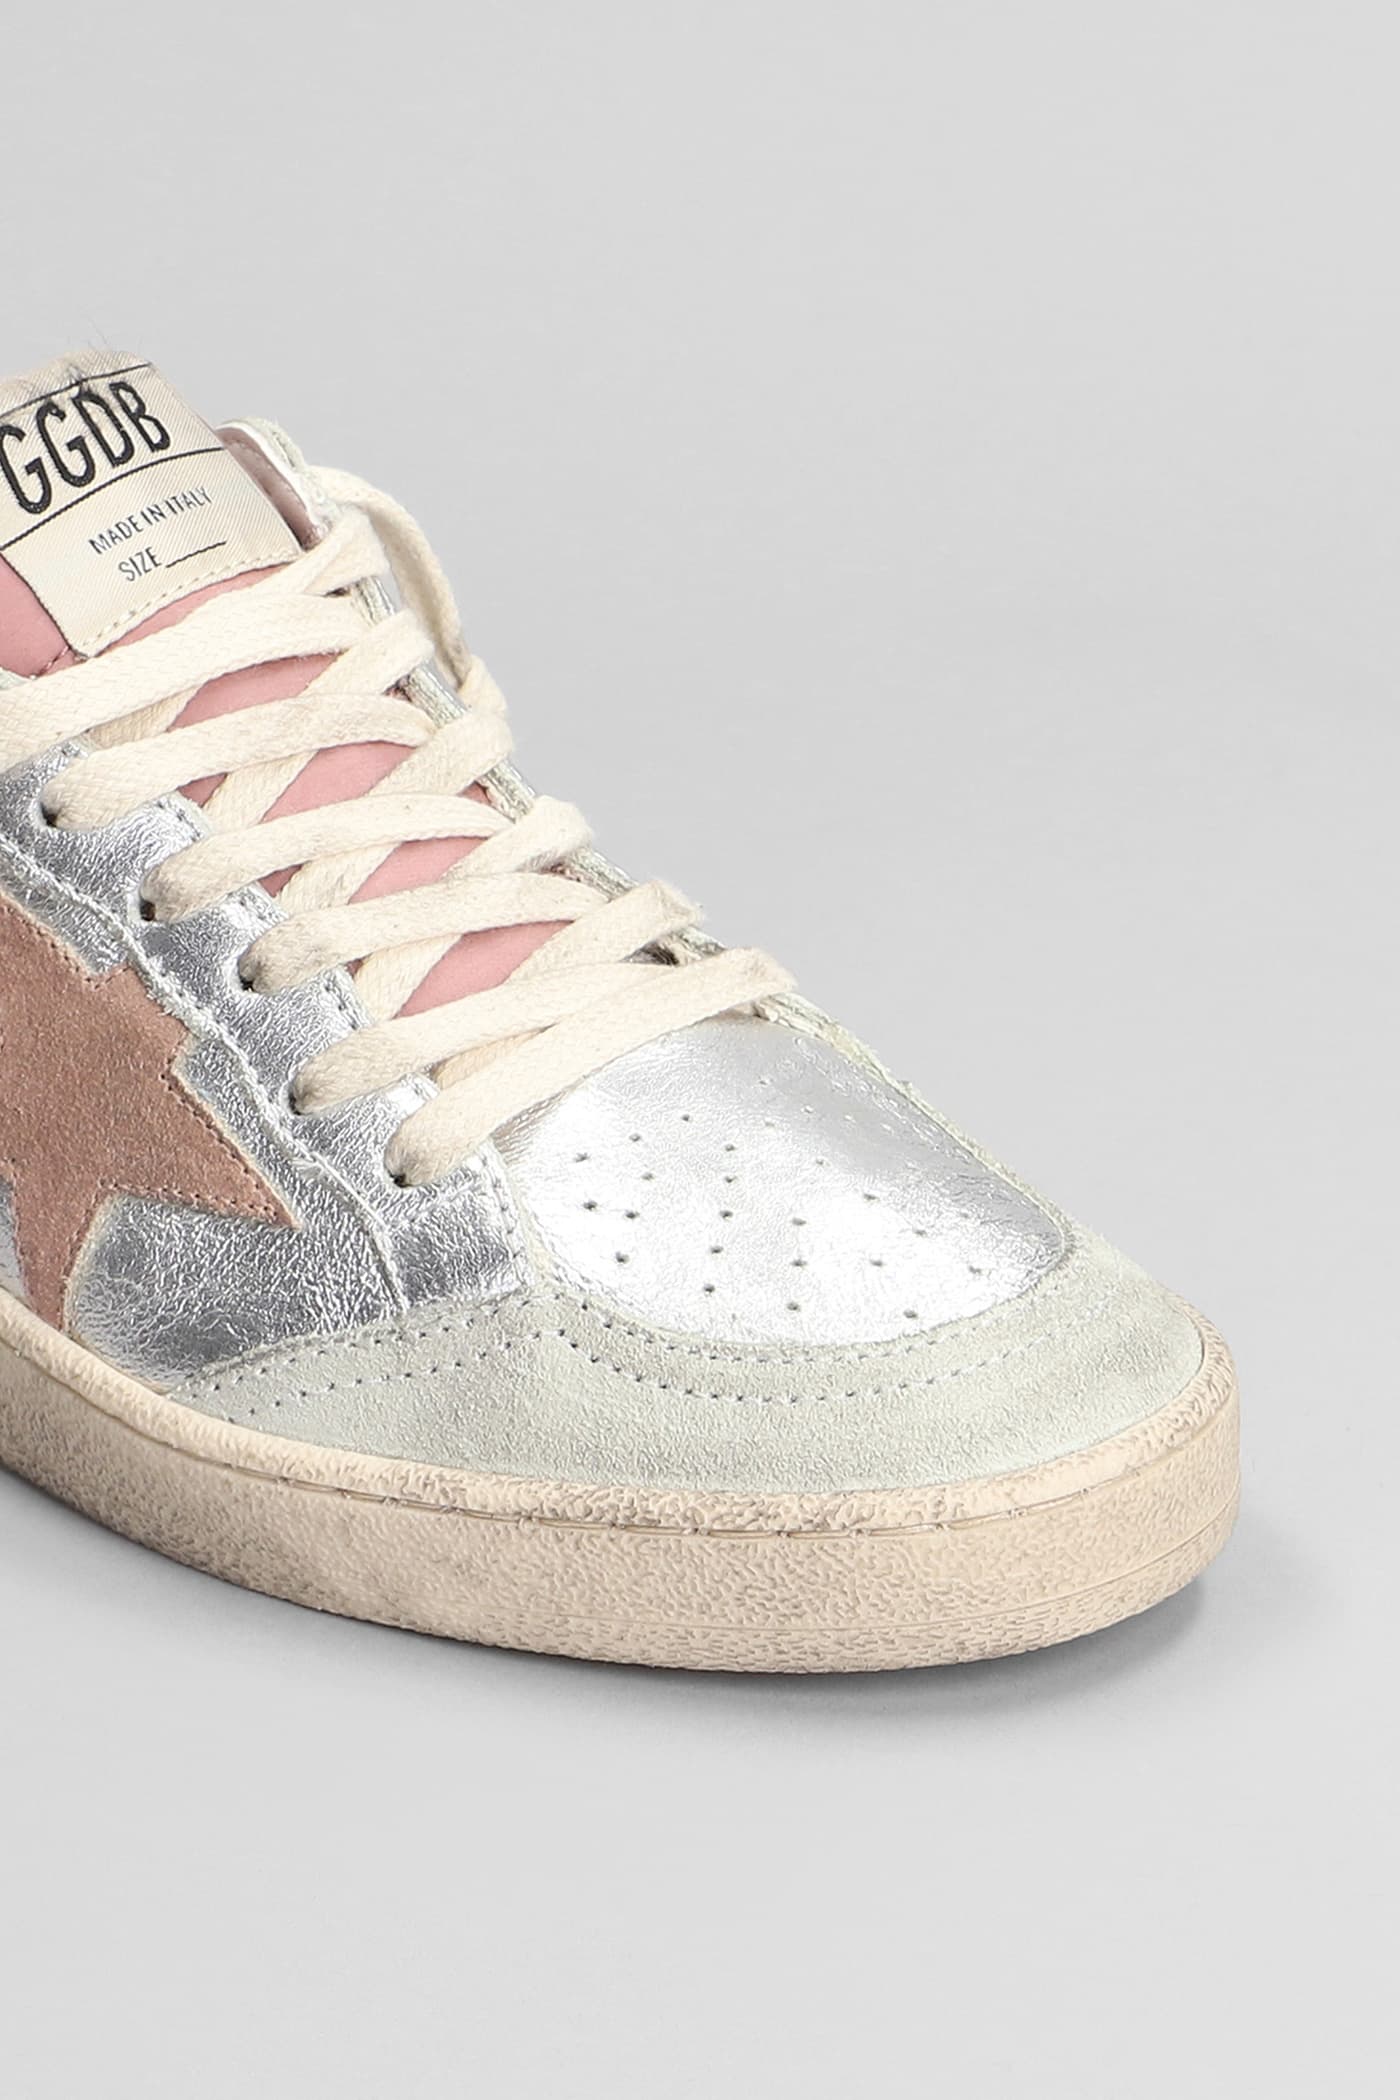 Shop Golden Goose Ball Star Sneakers In Silver Suede And Leather